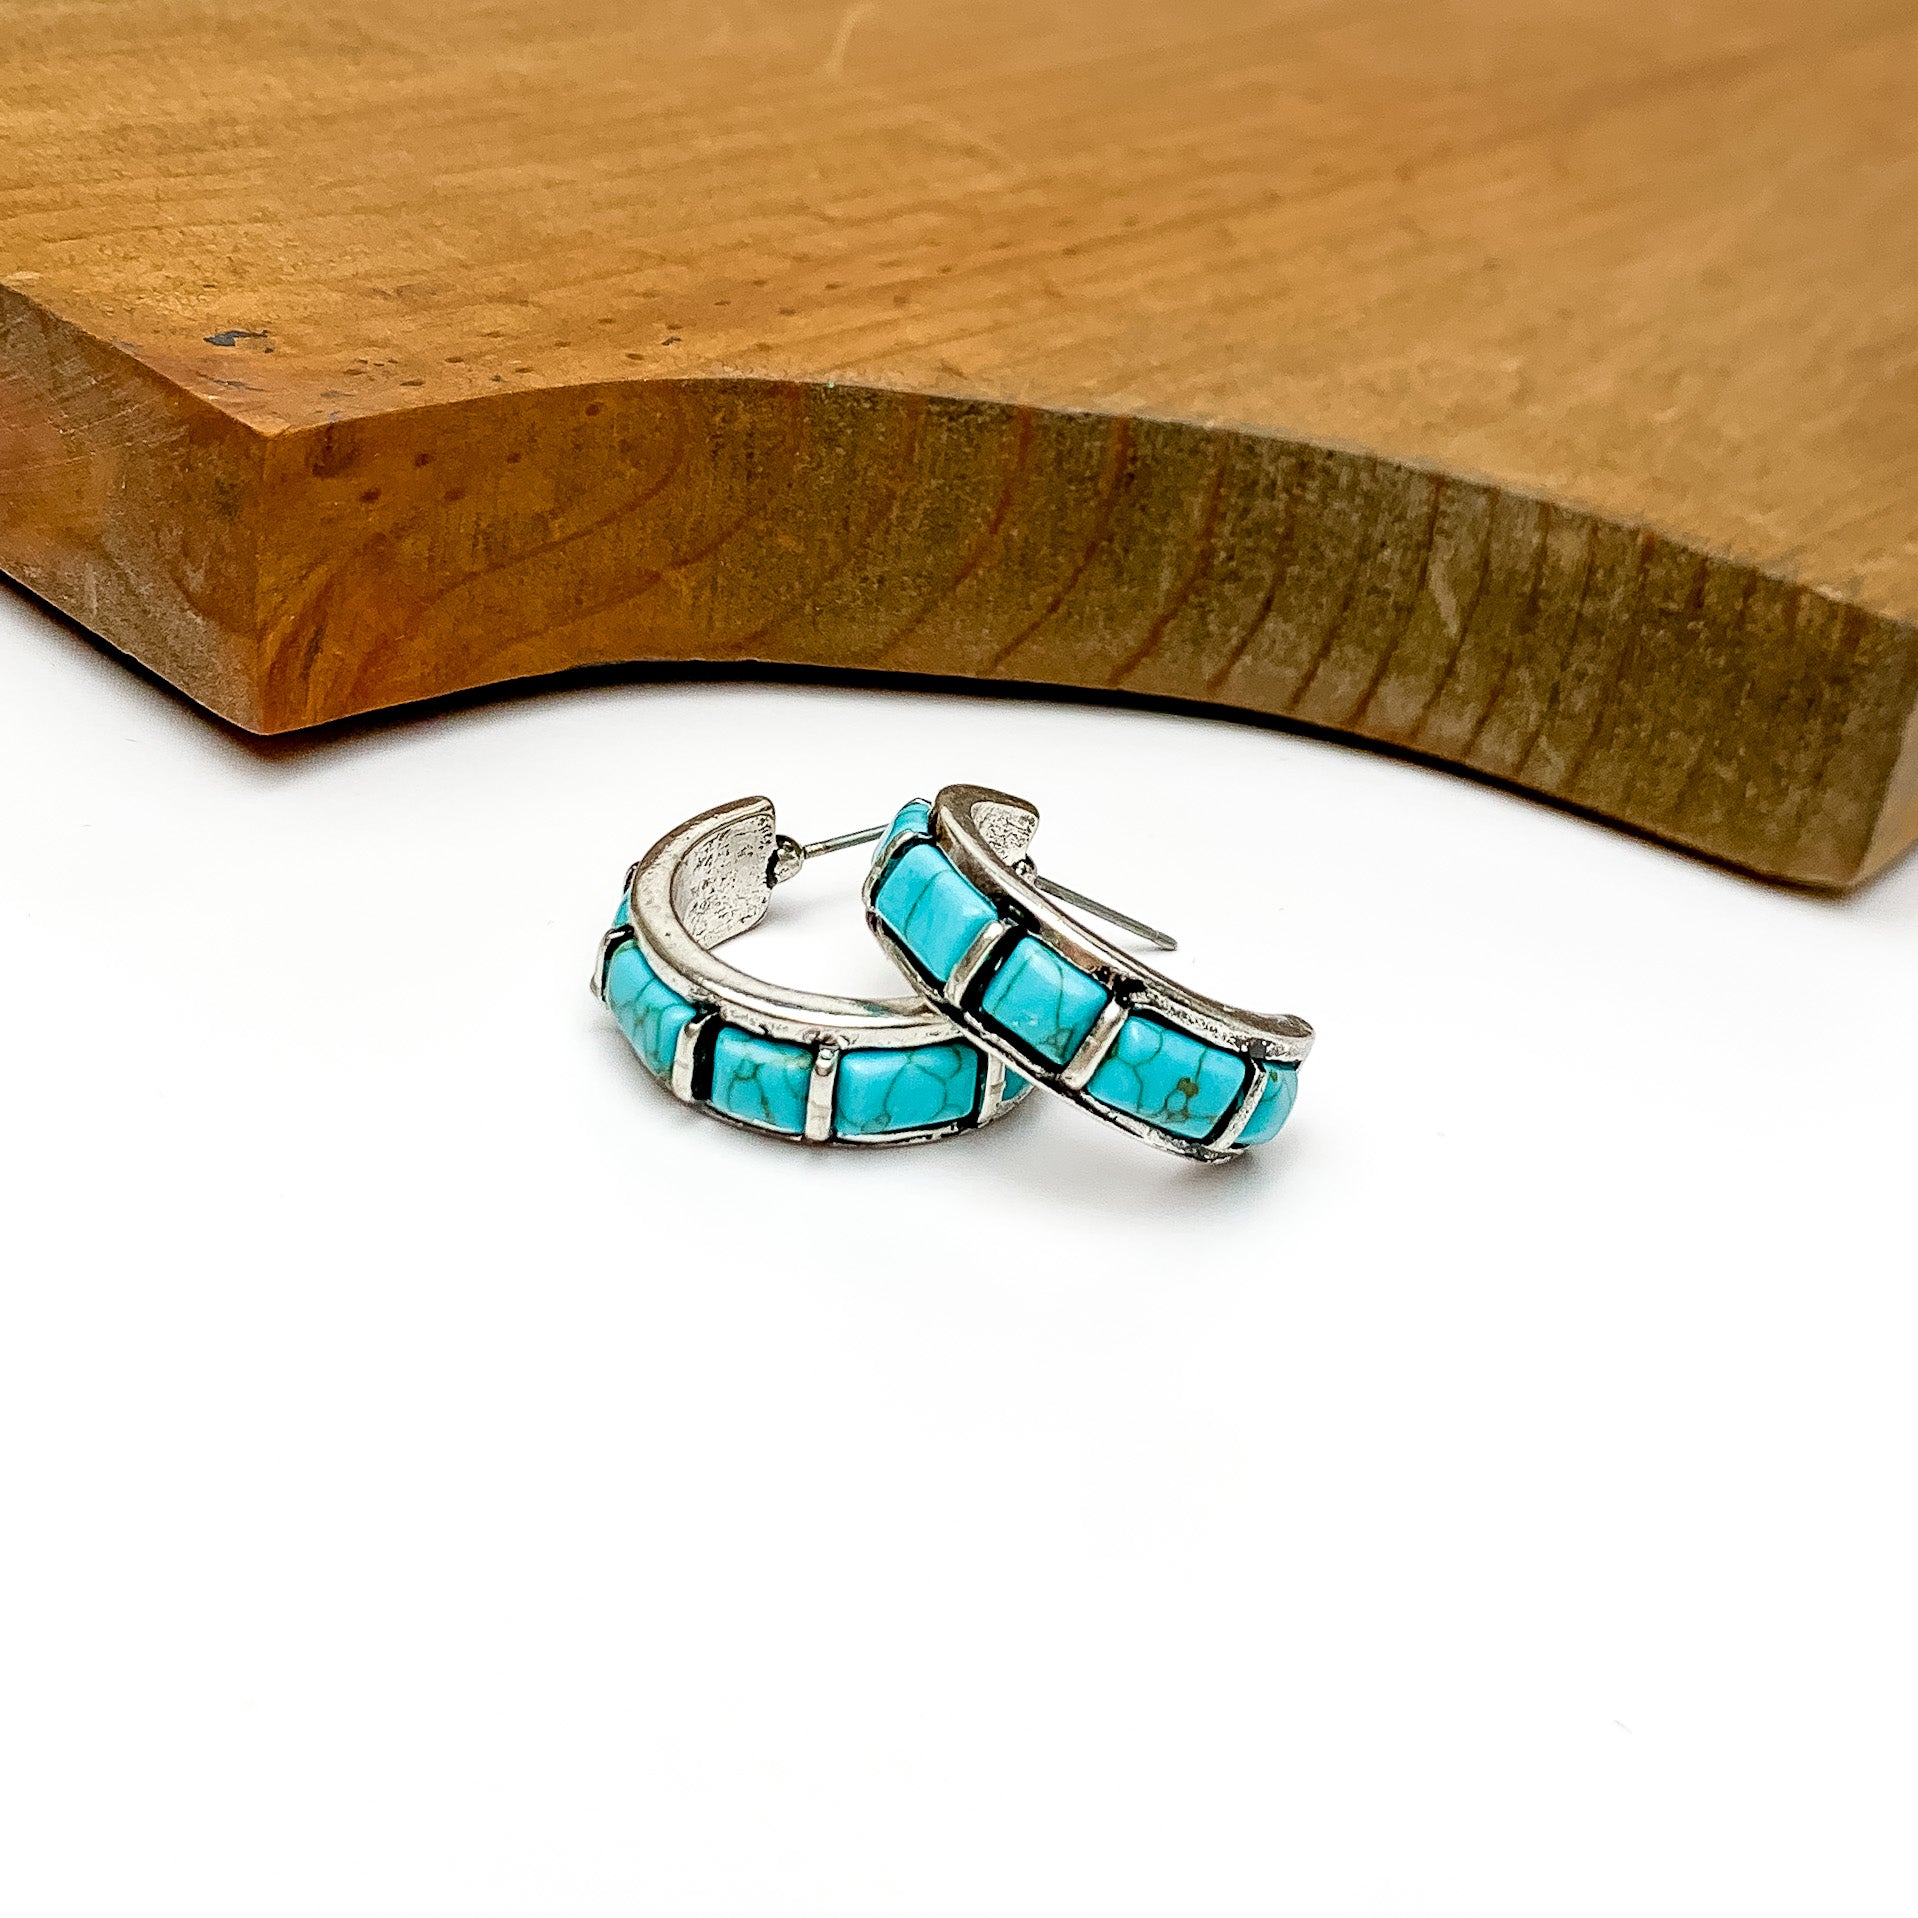 Turquois and silver tone medium size hoops earrings. Pictured with a white background and wood at the top.